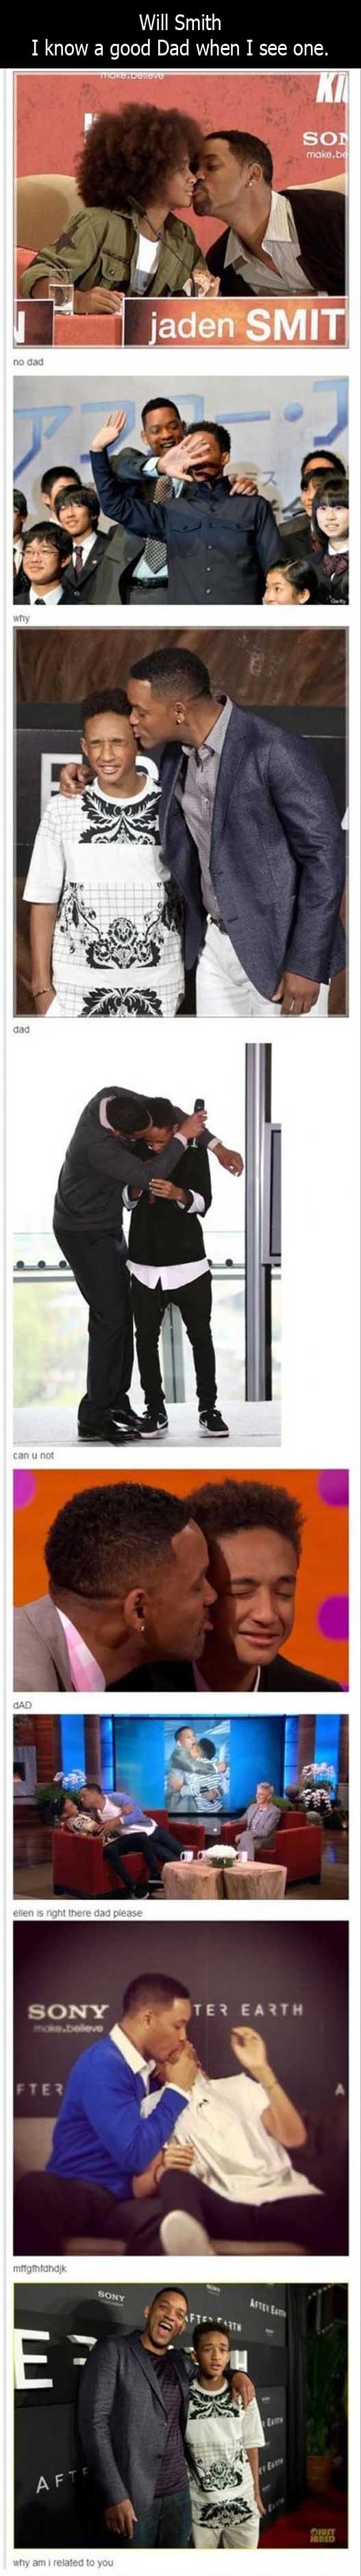 Will smith, I know a good dad when I see one